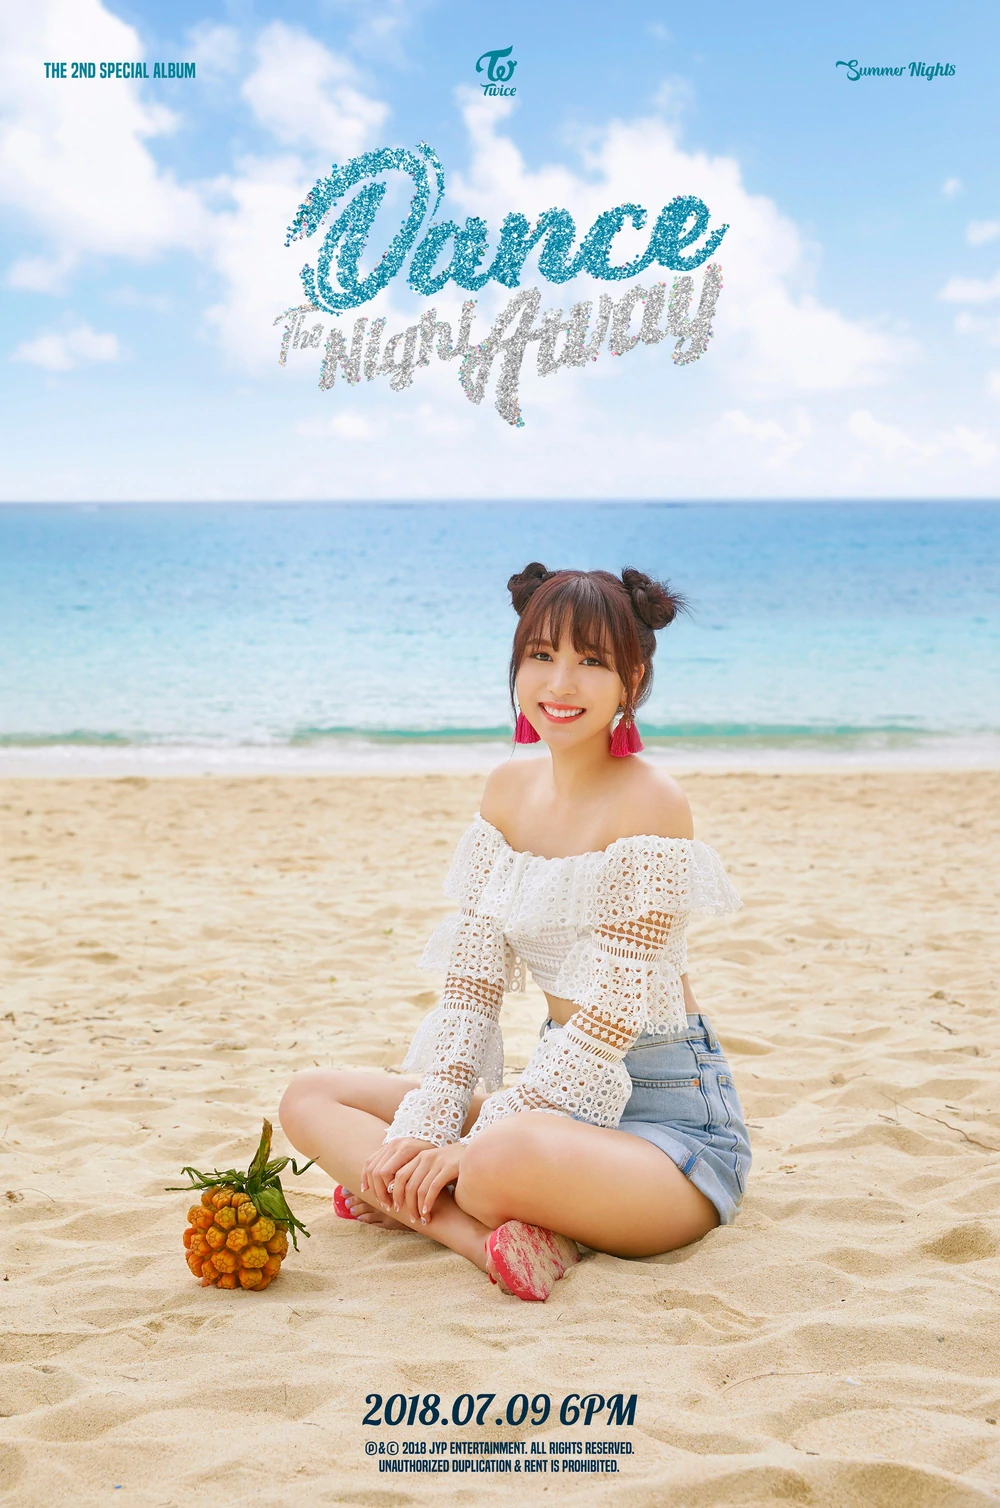 Twice Summer Nights Mina Concept Teaser Picture Image Photo Kpop K-Concept 4